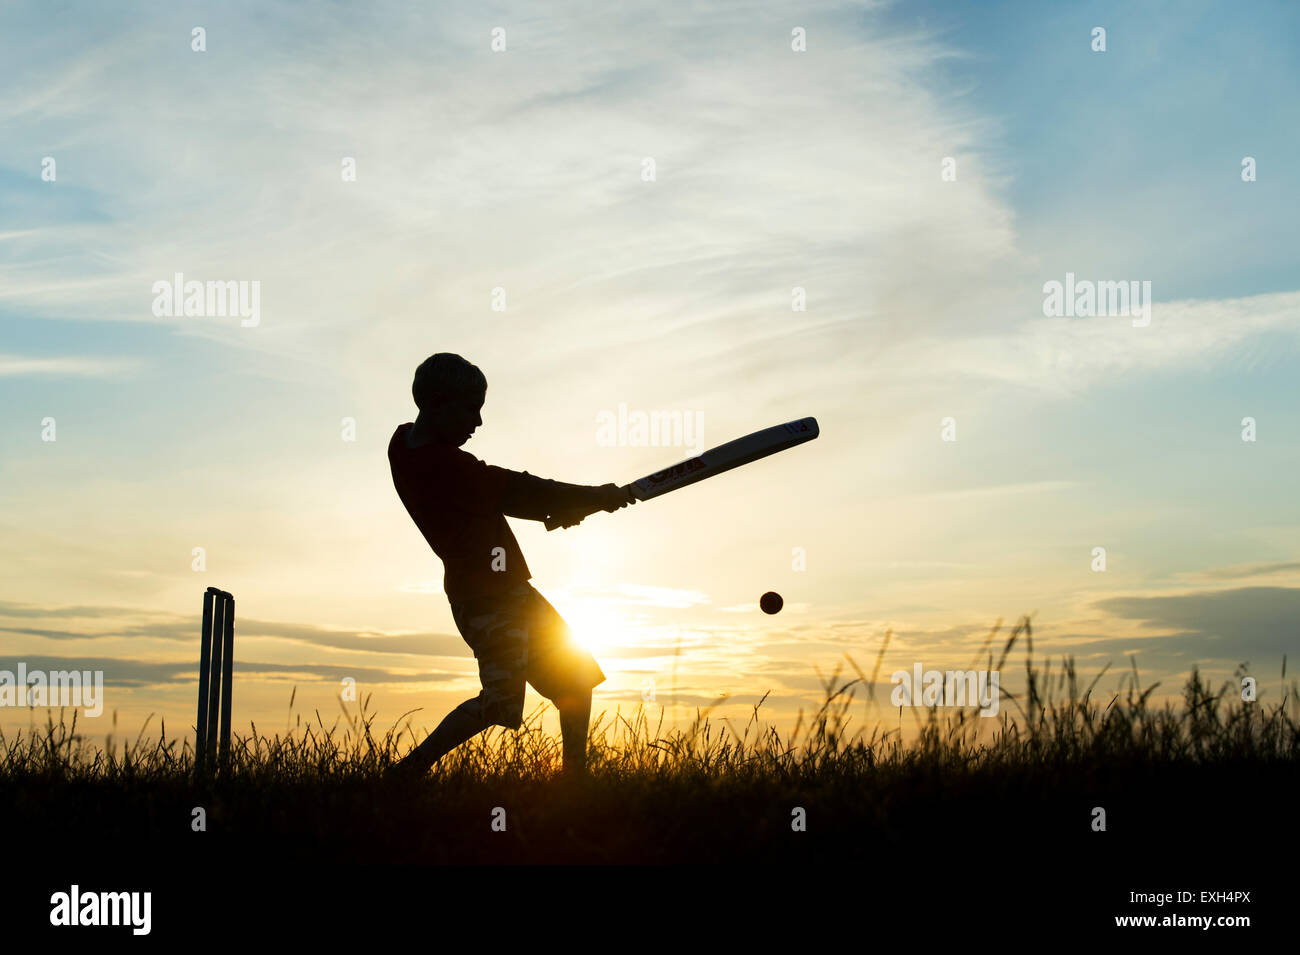 Silhouette of young boy playing cricket against a sunset background Stock Photo